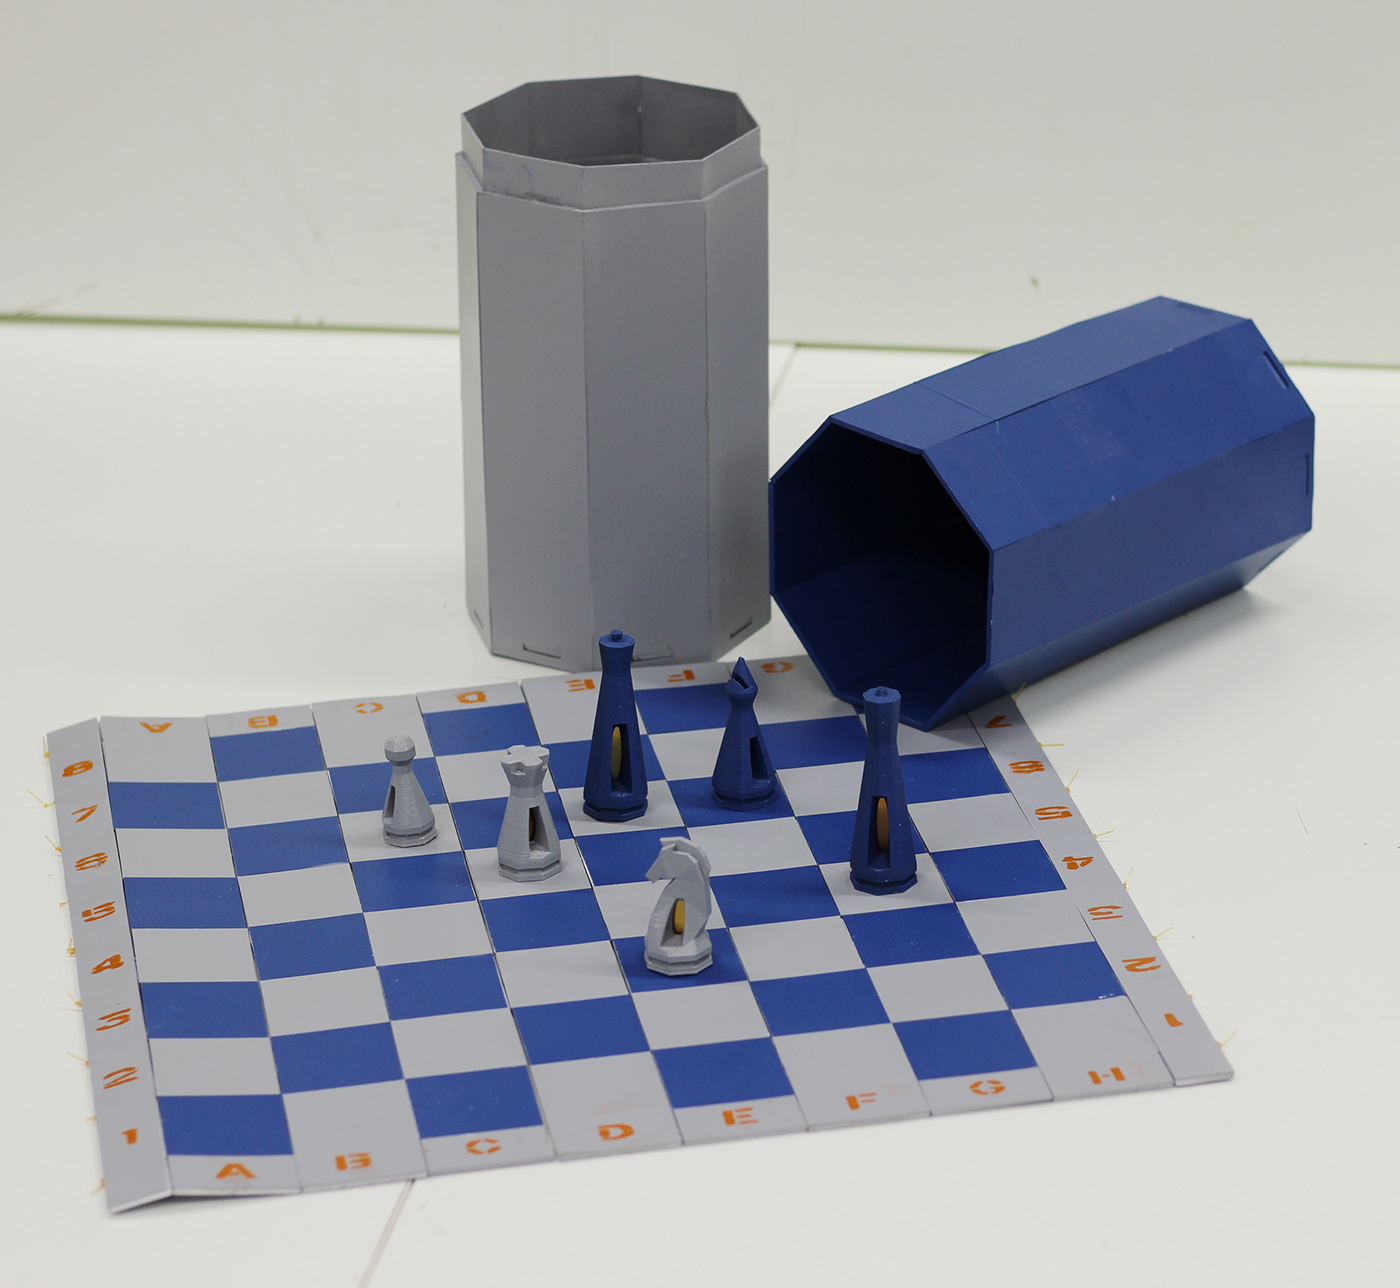 chess Chess Set Design industrial design  id design product design  3d printing chess set